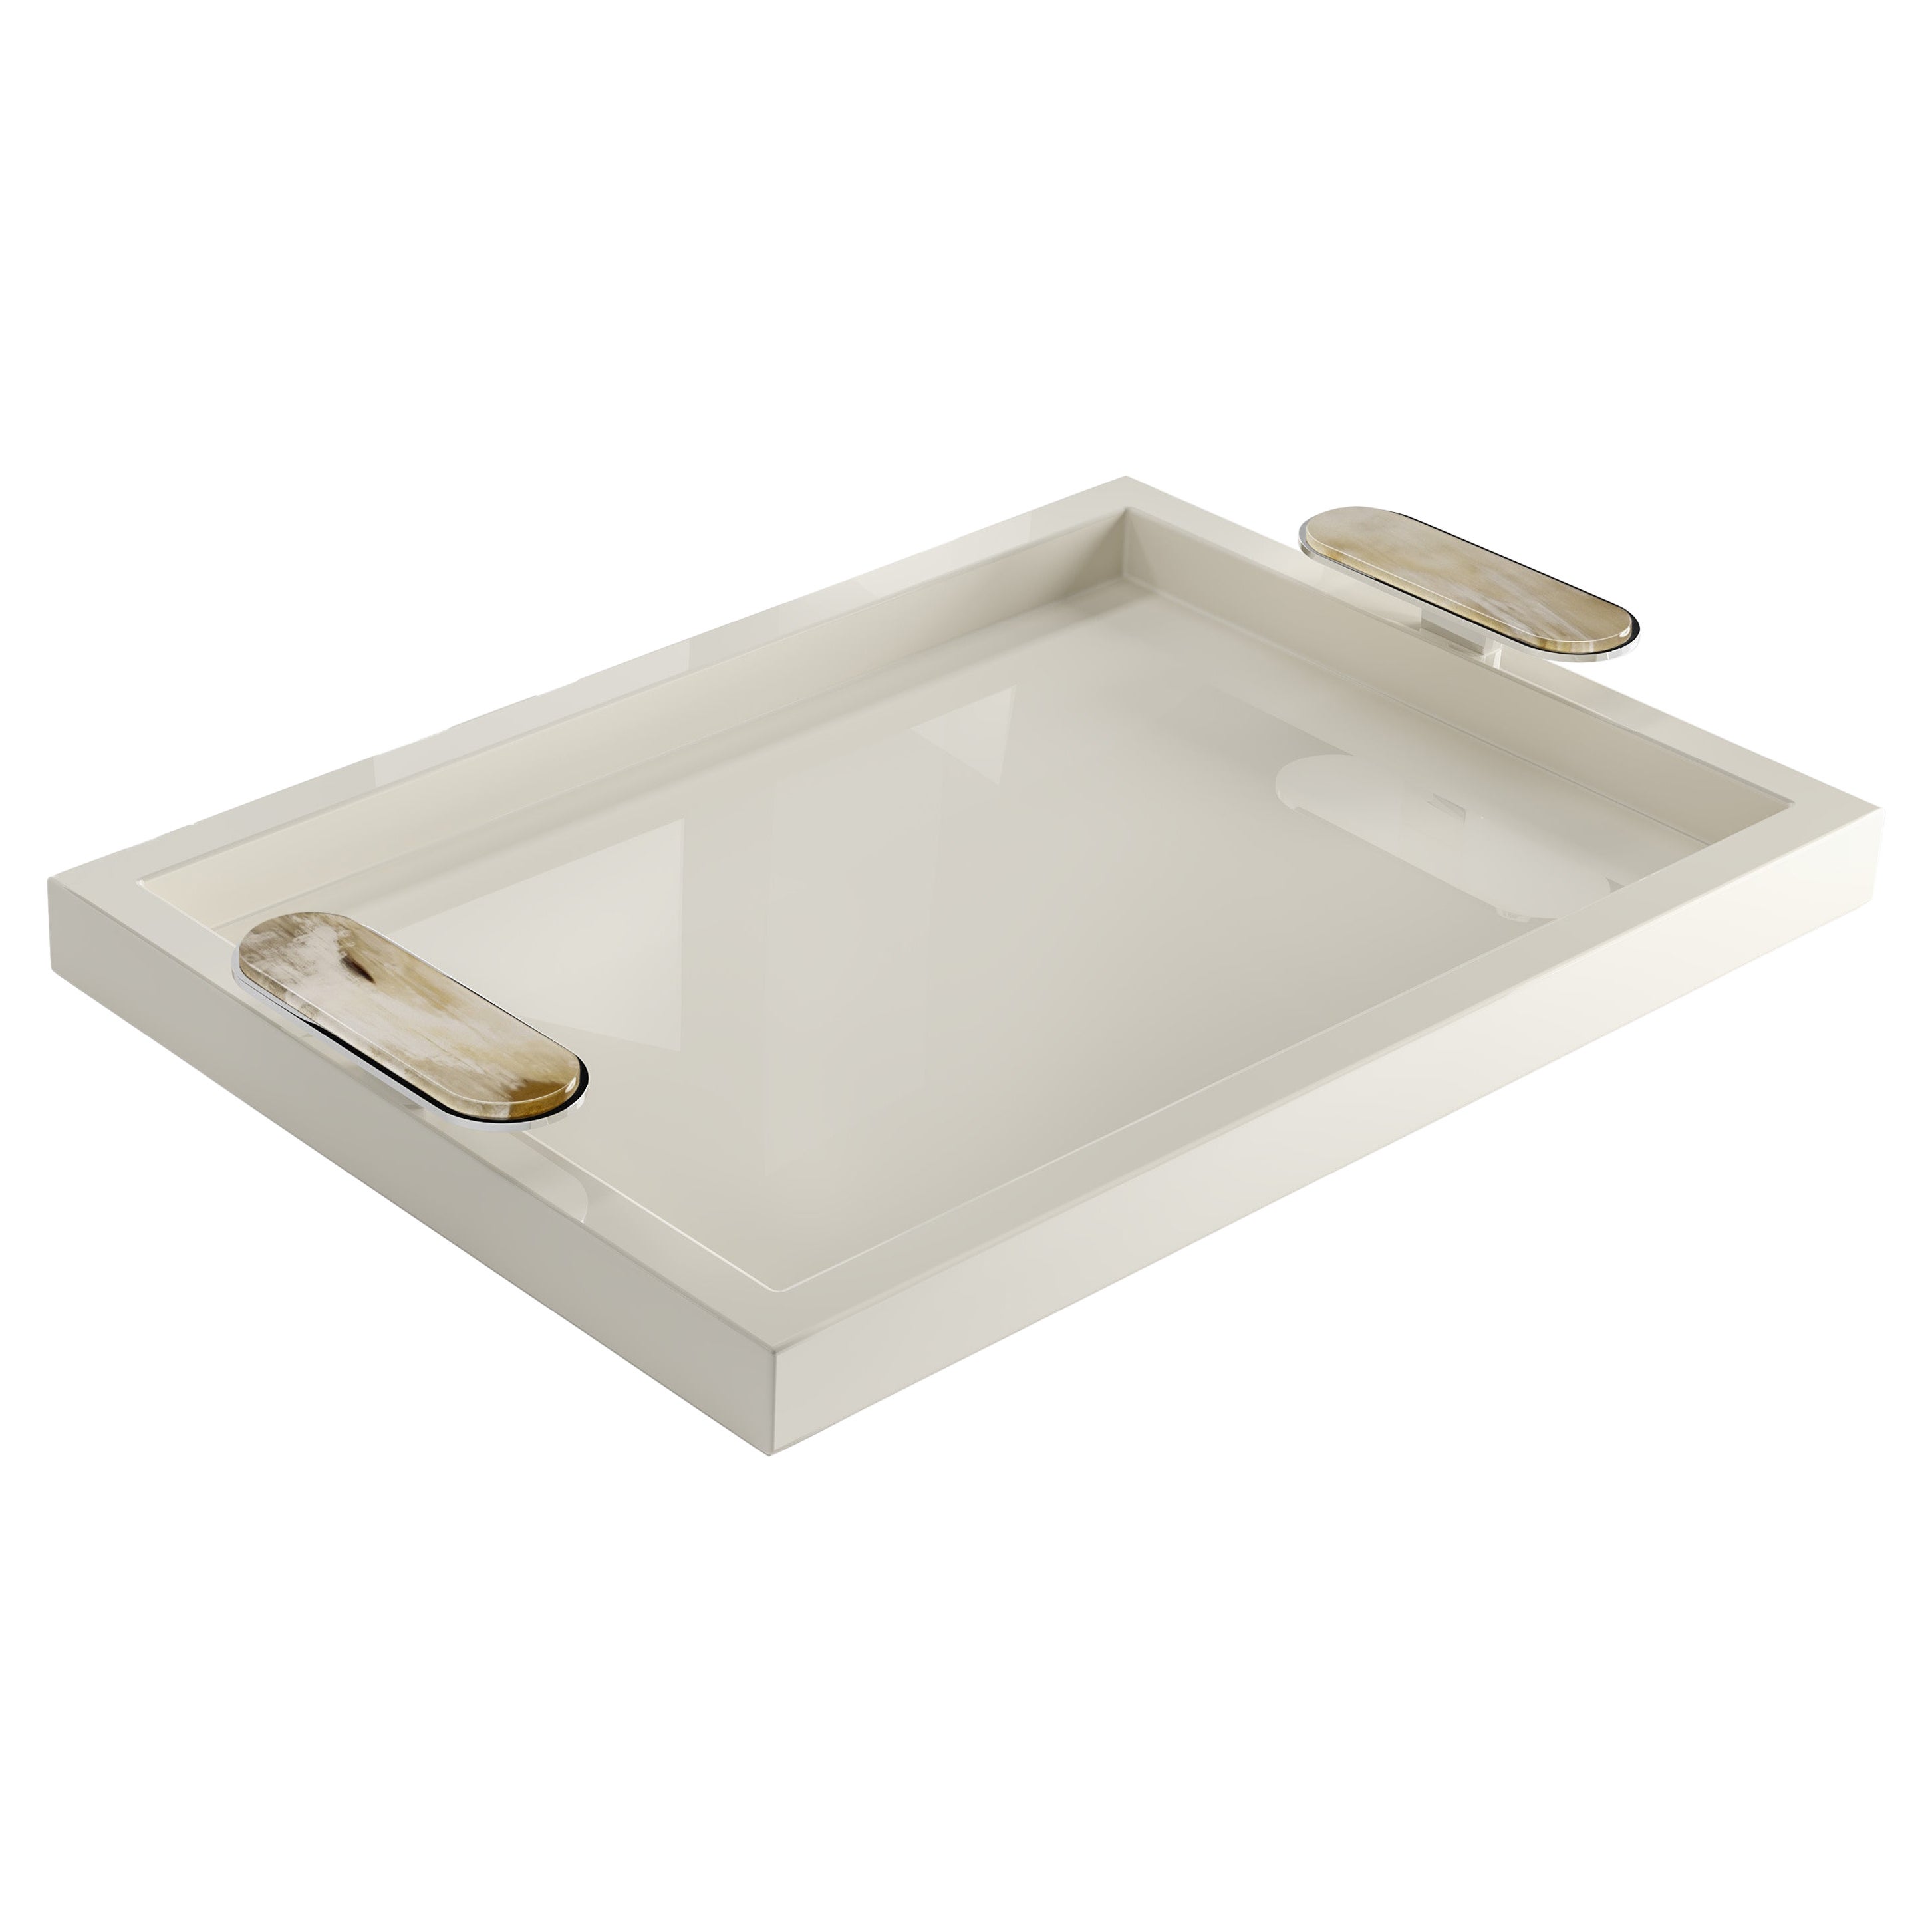 Berro Tray in Glossy Ivory Lacquered Wood and Corno Italiano, Mod. 2416 For Sale